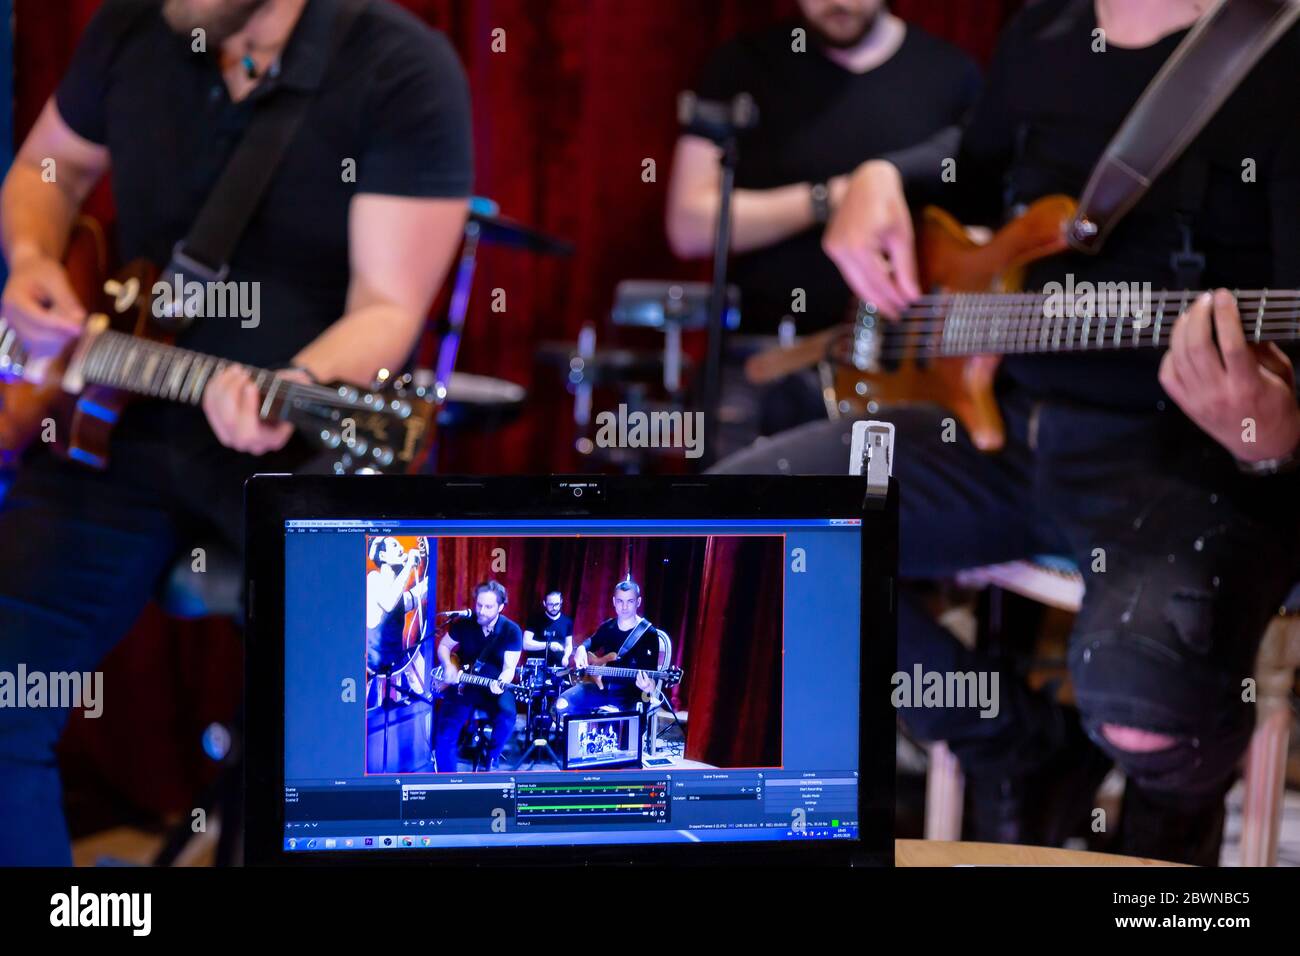 The band of Musicians Playing electric Guitar, Bass Guitar and Drums during the Concert broadcast Online on Social  Media Platforms in the Bar. Stock Photo